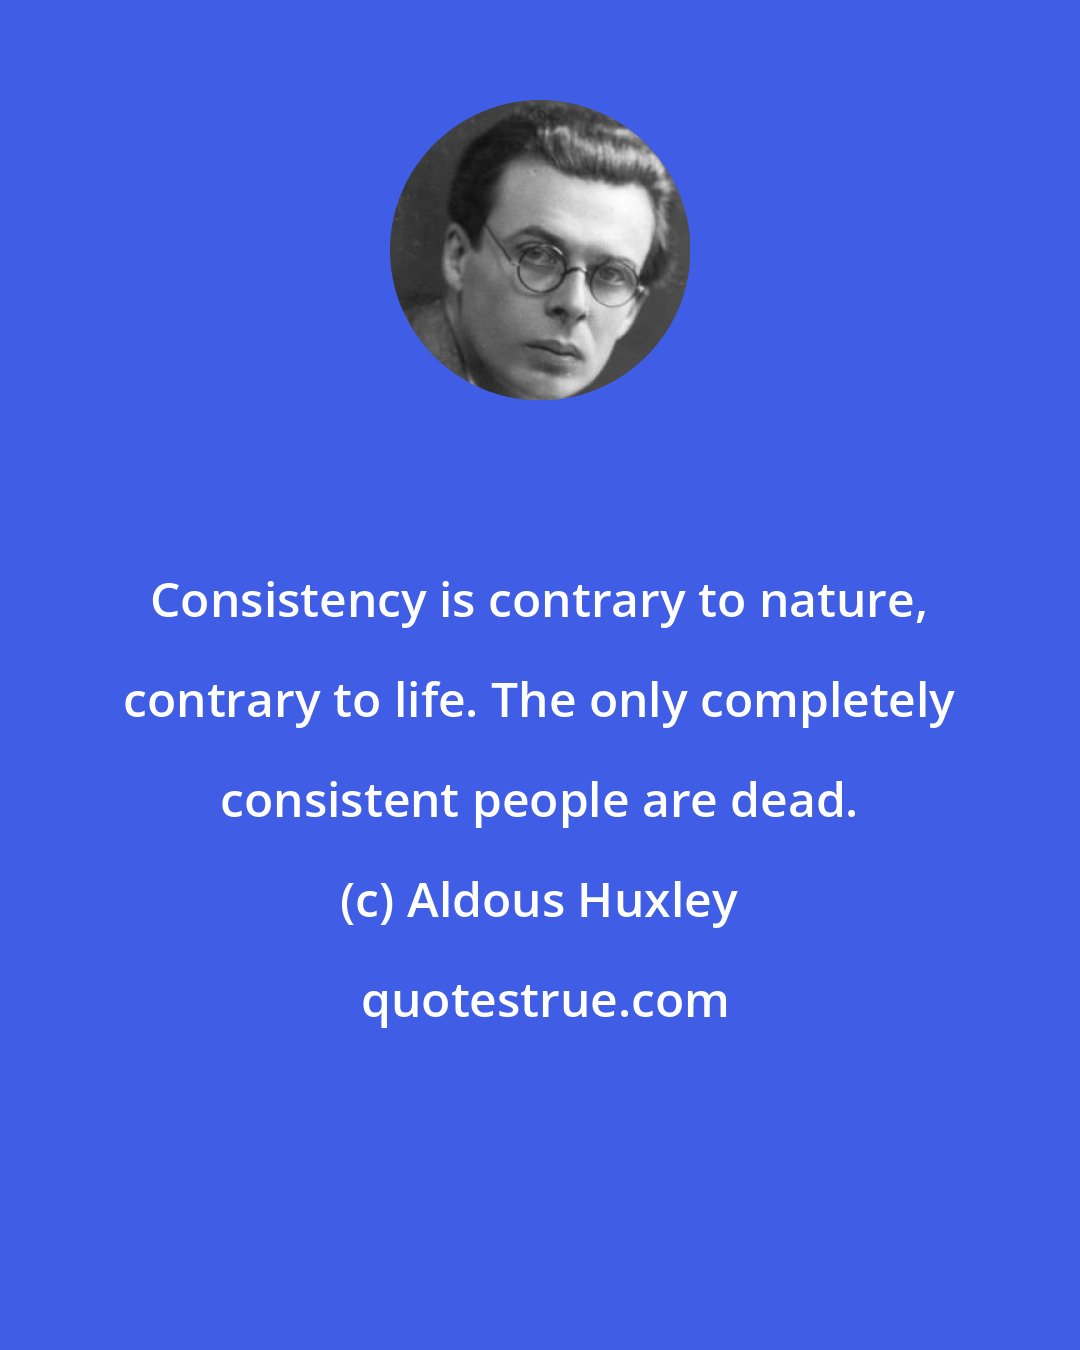 Aldous Huxley: Consistency is contrary to nature, contrary to life. The only completely consistent people are dead.